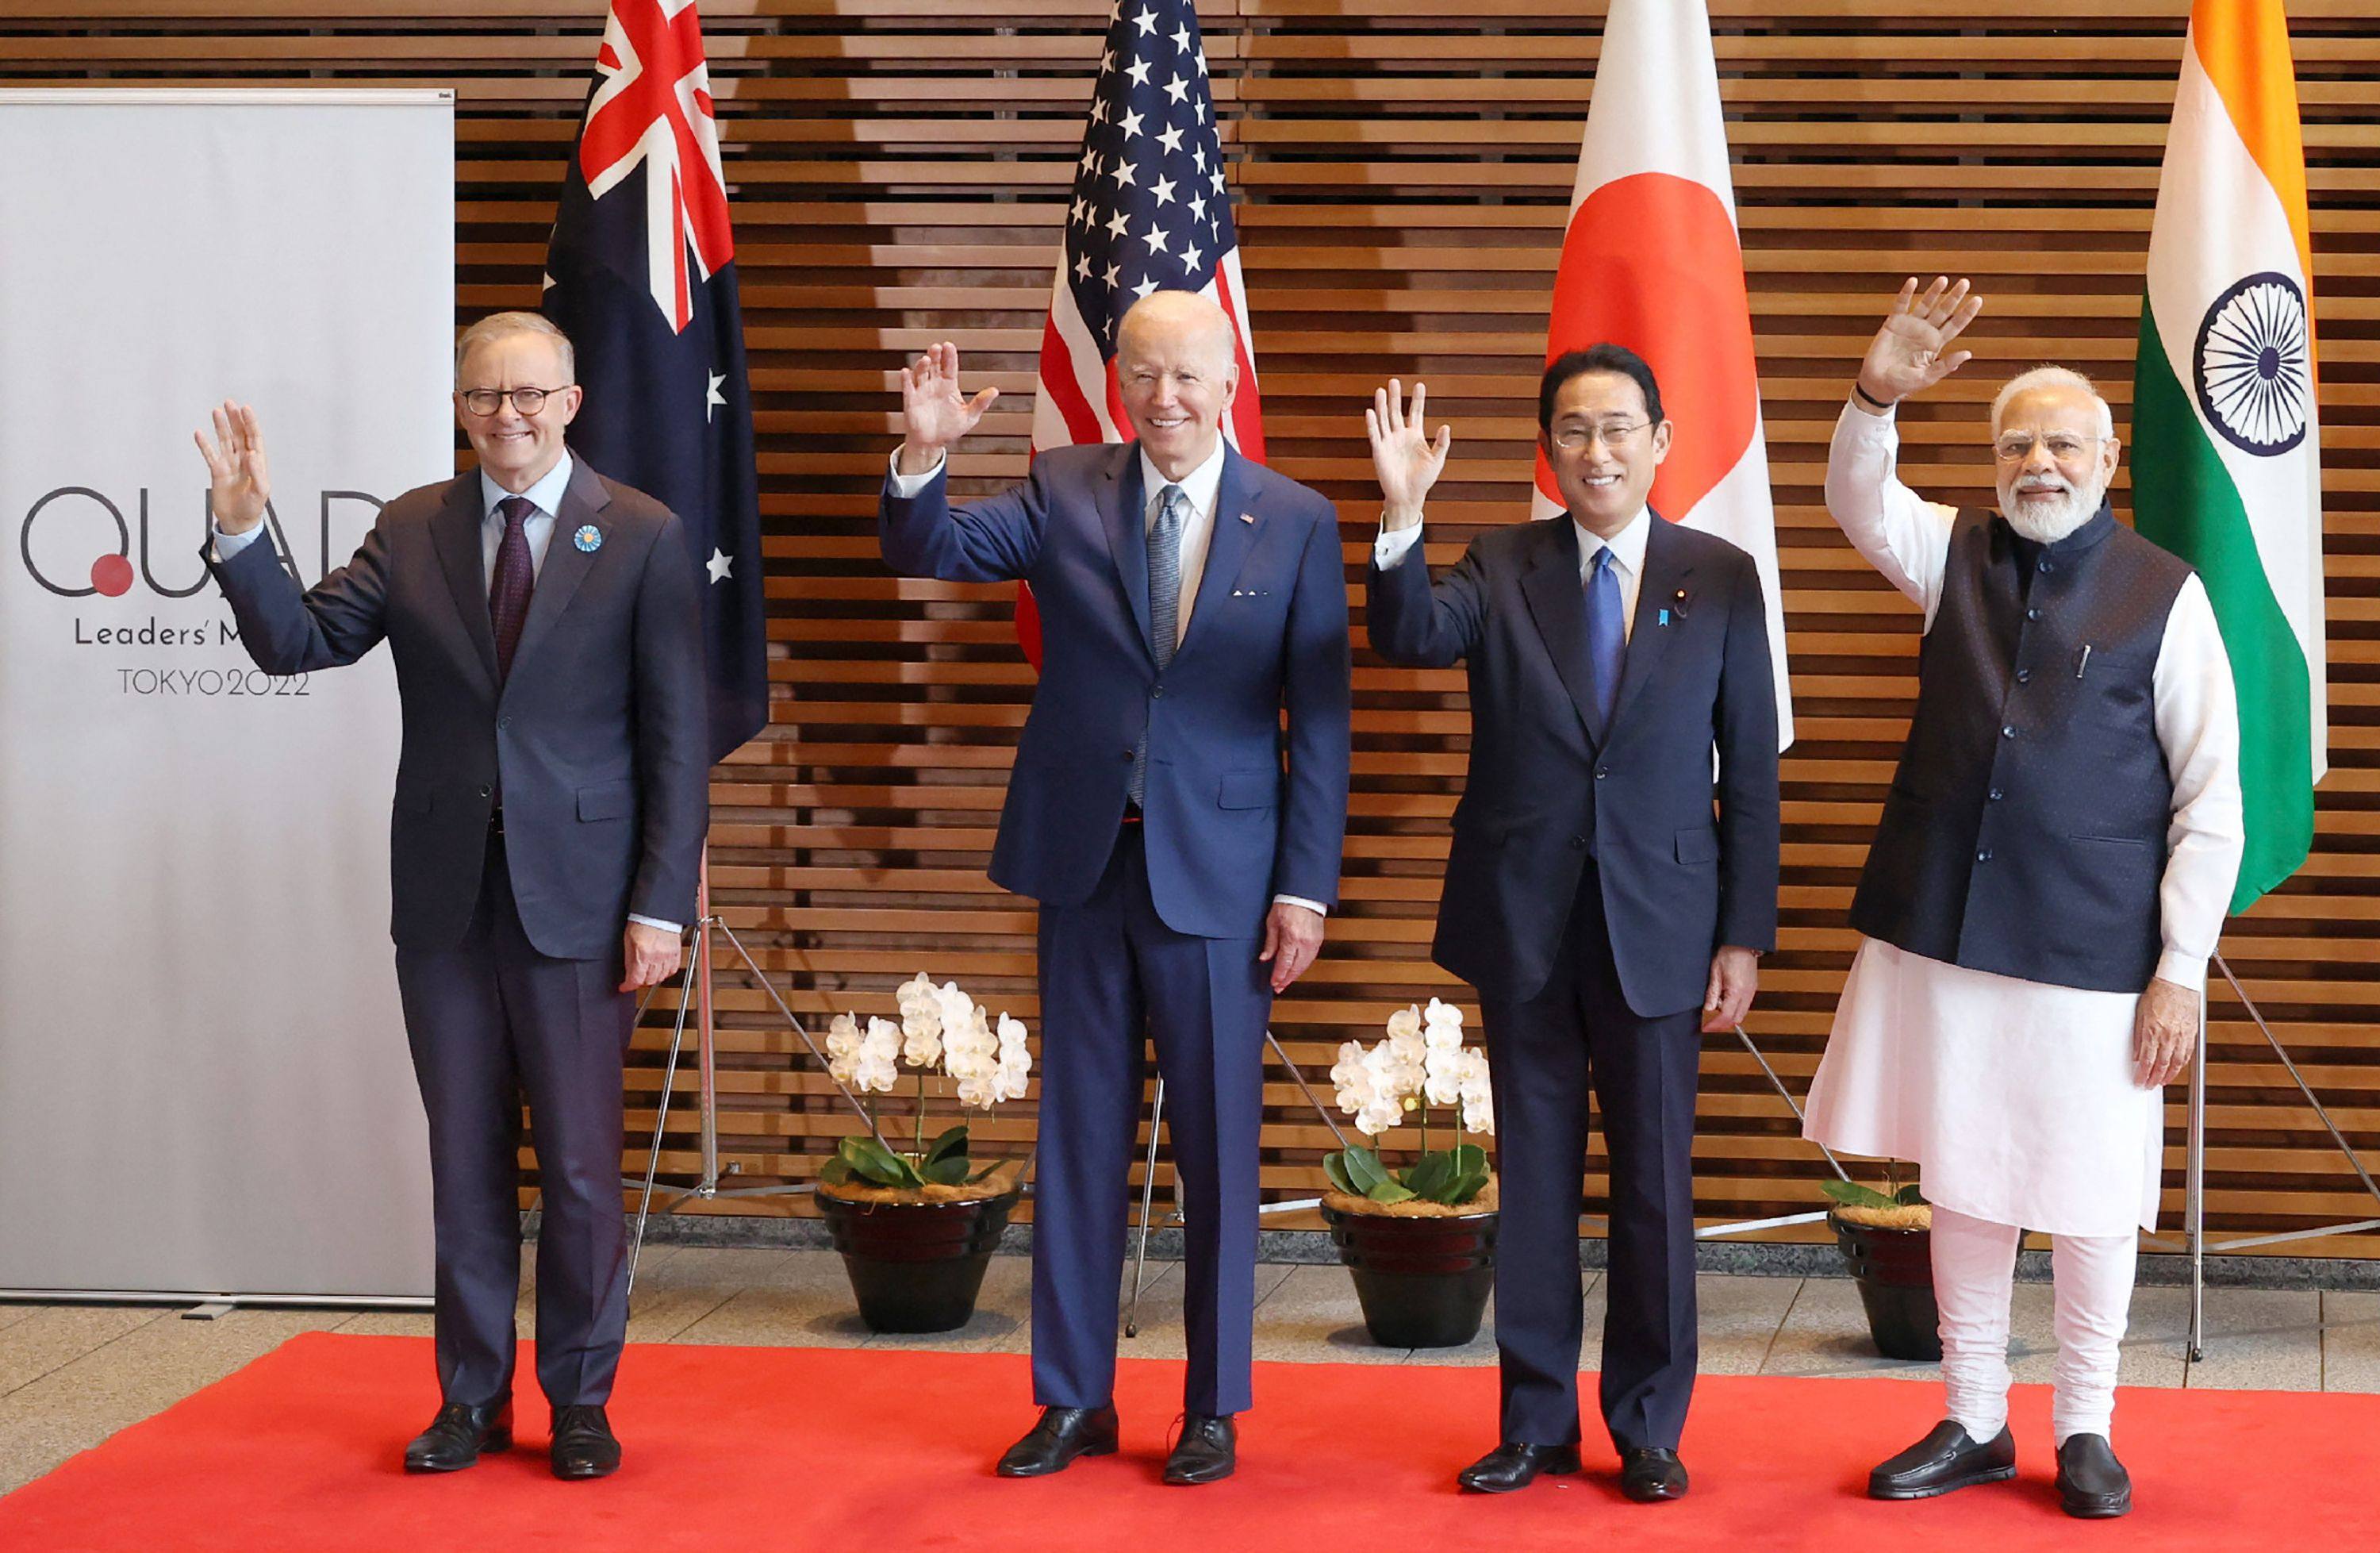 Australian Prime Minister Anthony Albanese, US President Joe Biden, Japanese PM Fumio Kishida, and Indian PM Narendra Modi gather prior to the Quad meeting in Tokyo on May 24, 2022. Photo: AFP